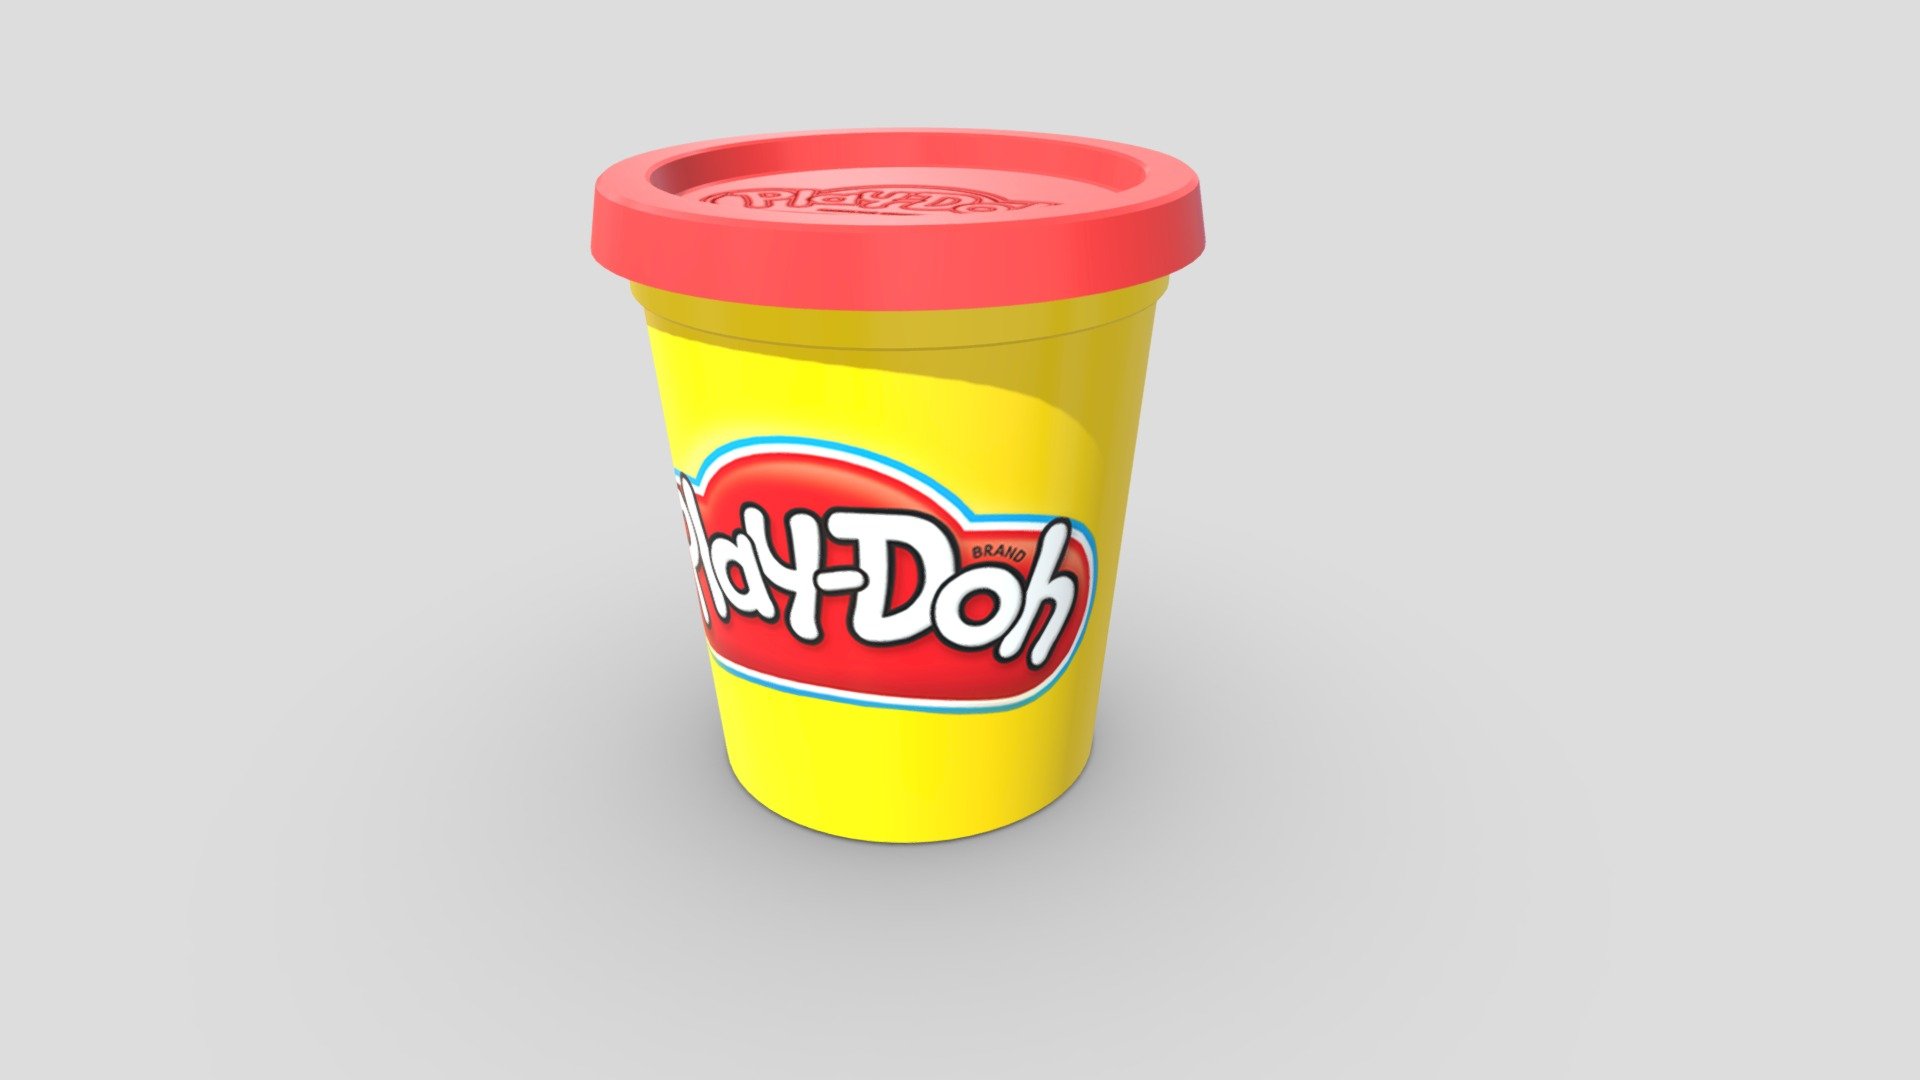 Play-Doh clay compound